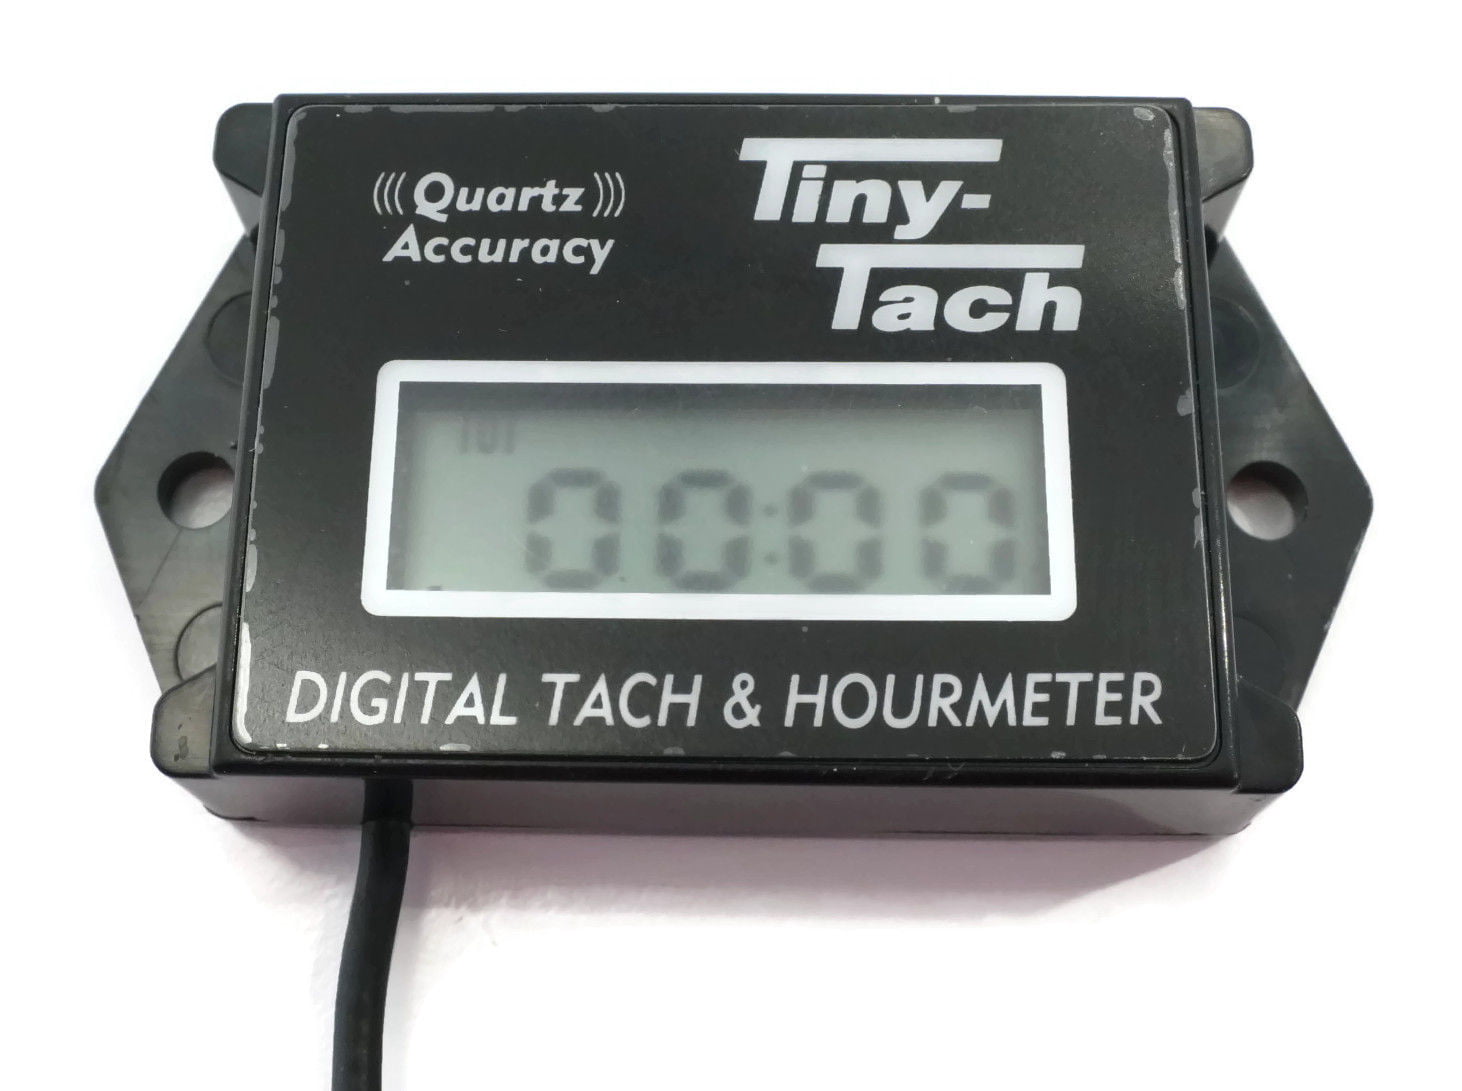 5 Diesel Engine Tiny Tach HOUR METER TACHOMETER 1/4" Transducer MDS-1/4 MDS-1Q 